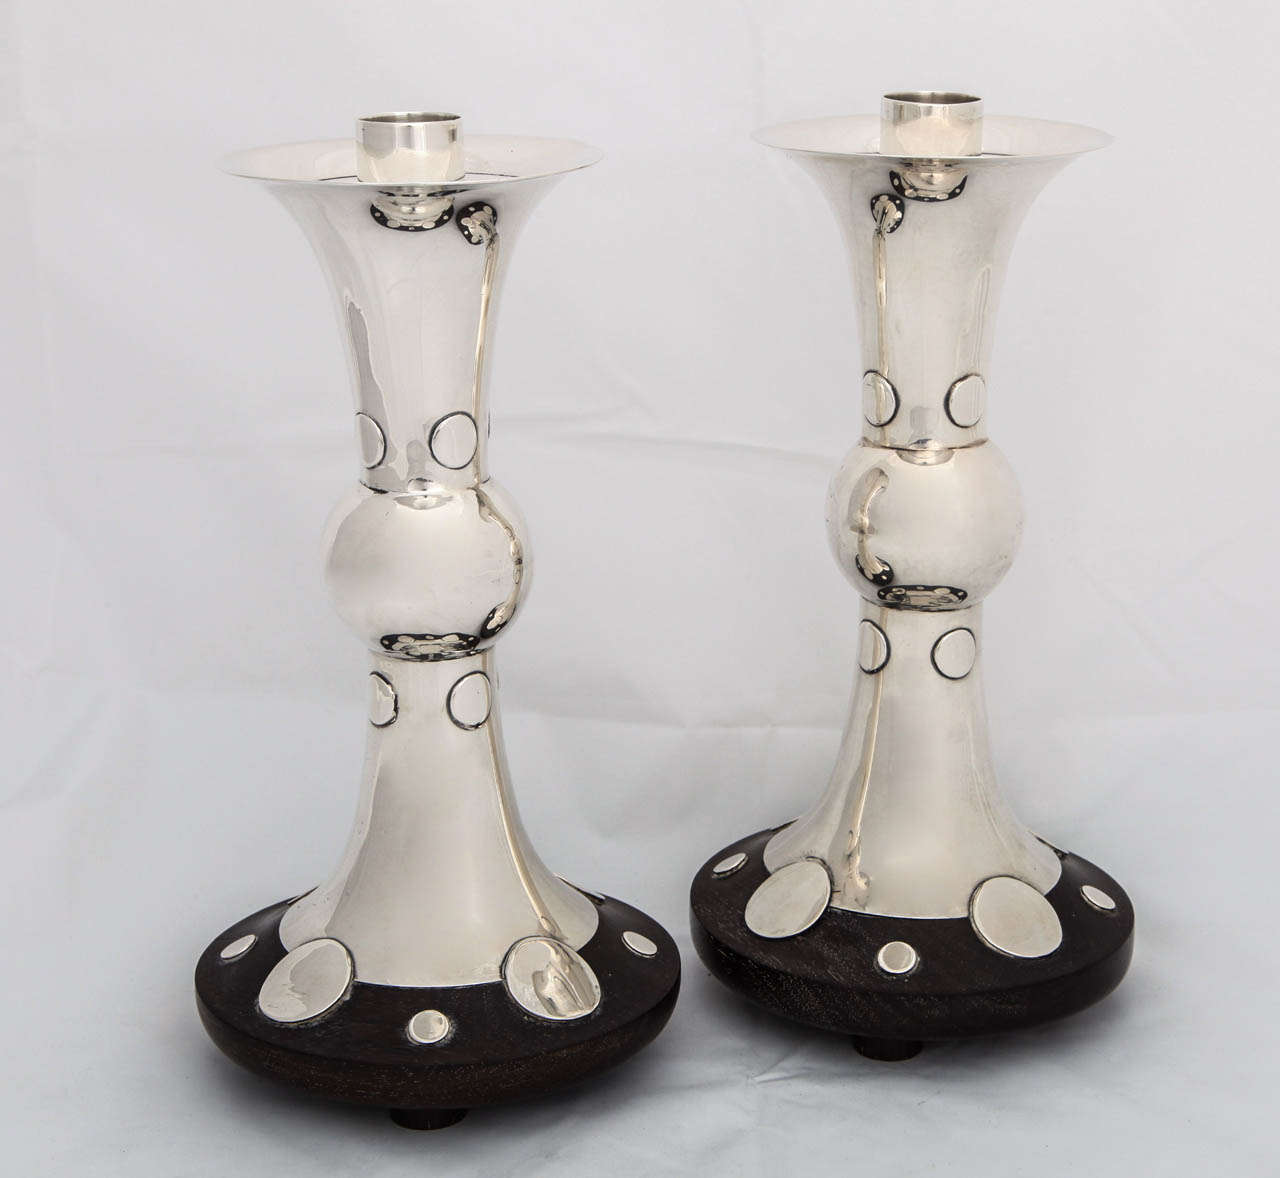 An important pair of taller sterling silver and rosewood candlesticks by William Spratling. Hand hammered silver signed on the underside with the spratling mark.